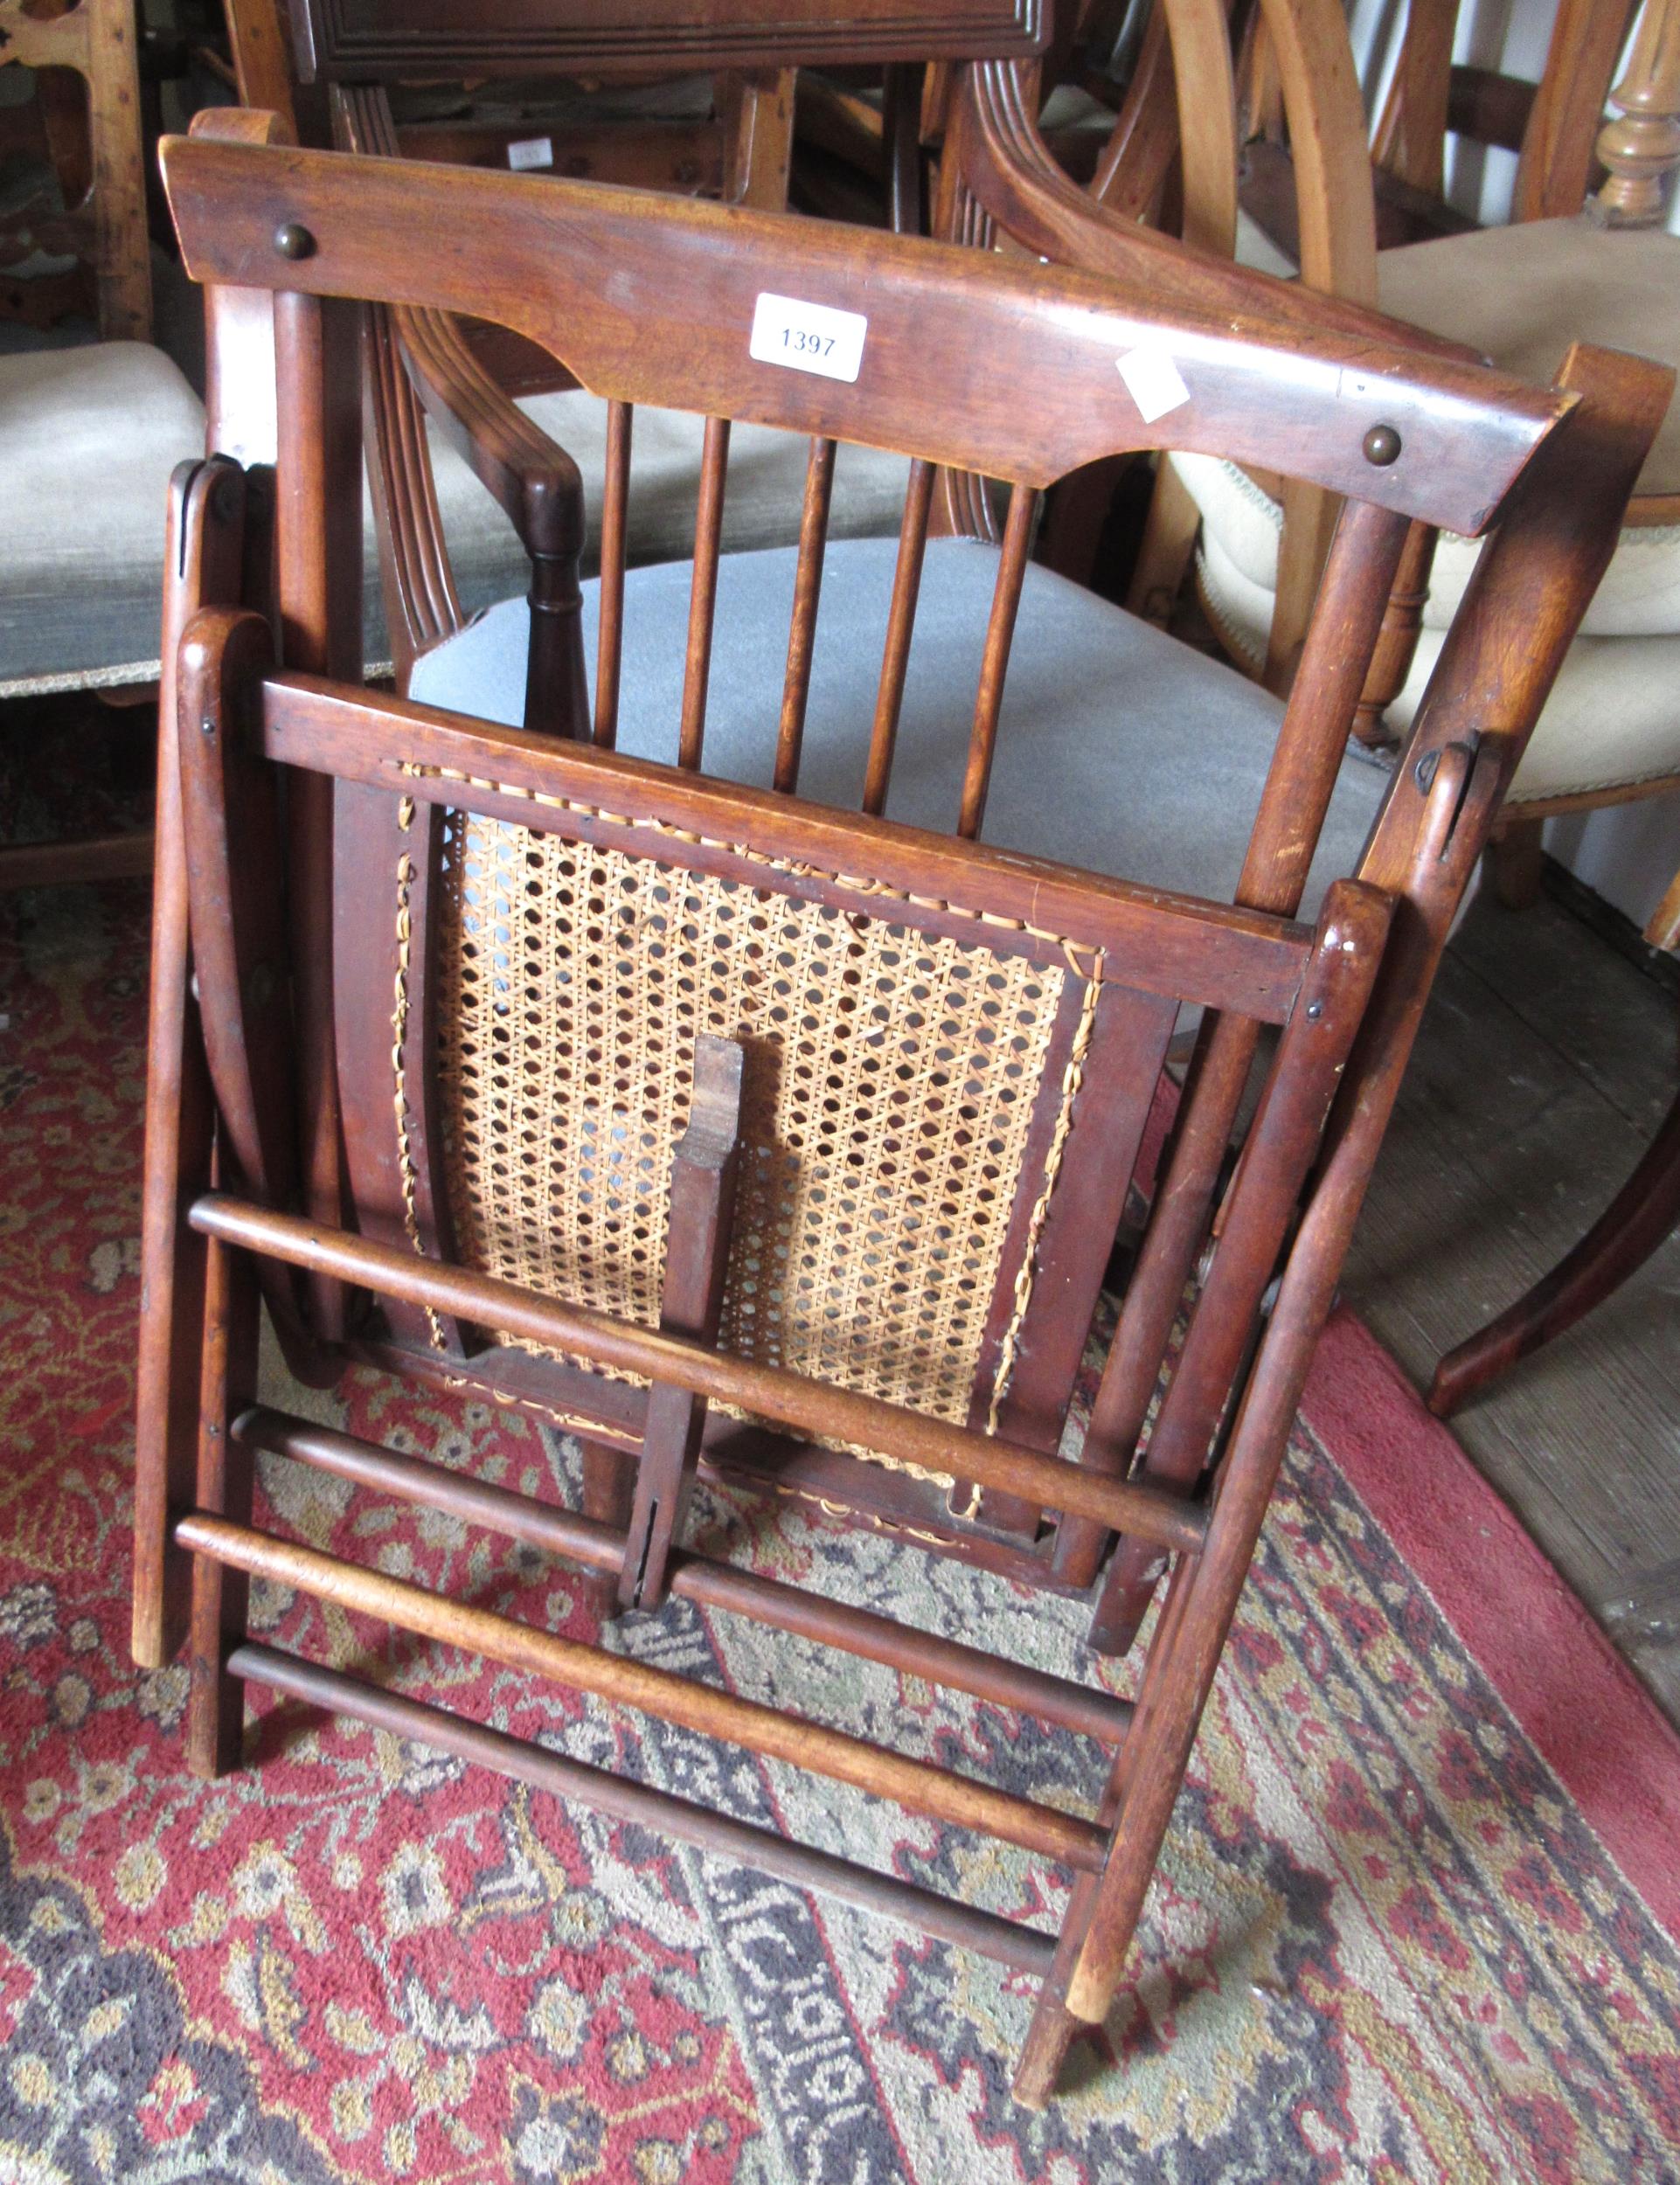 Late 19th / early 20th Century folding campaign chair with a spindle back and cane seat - Image 2 of 2